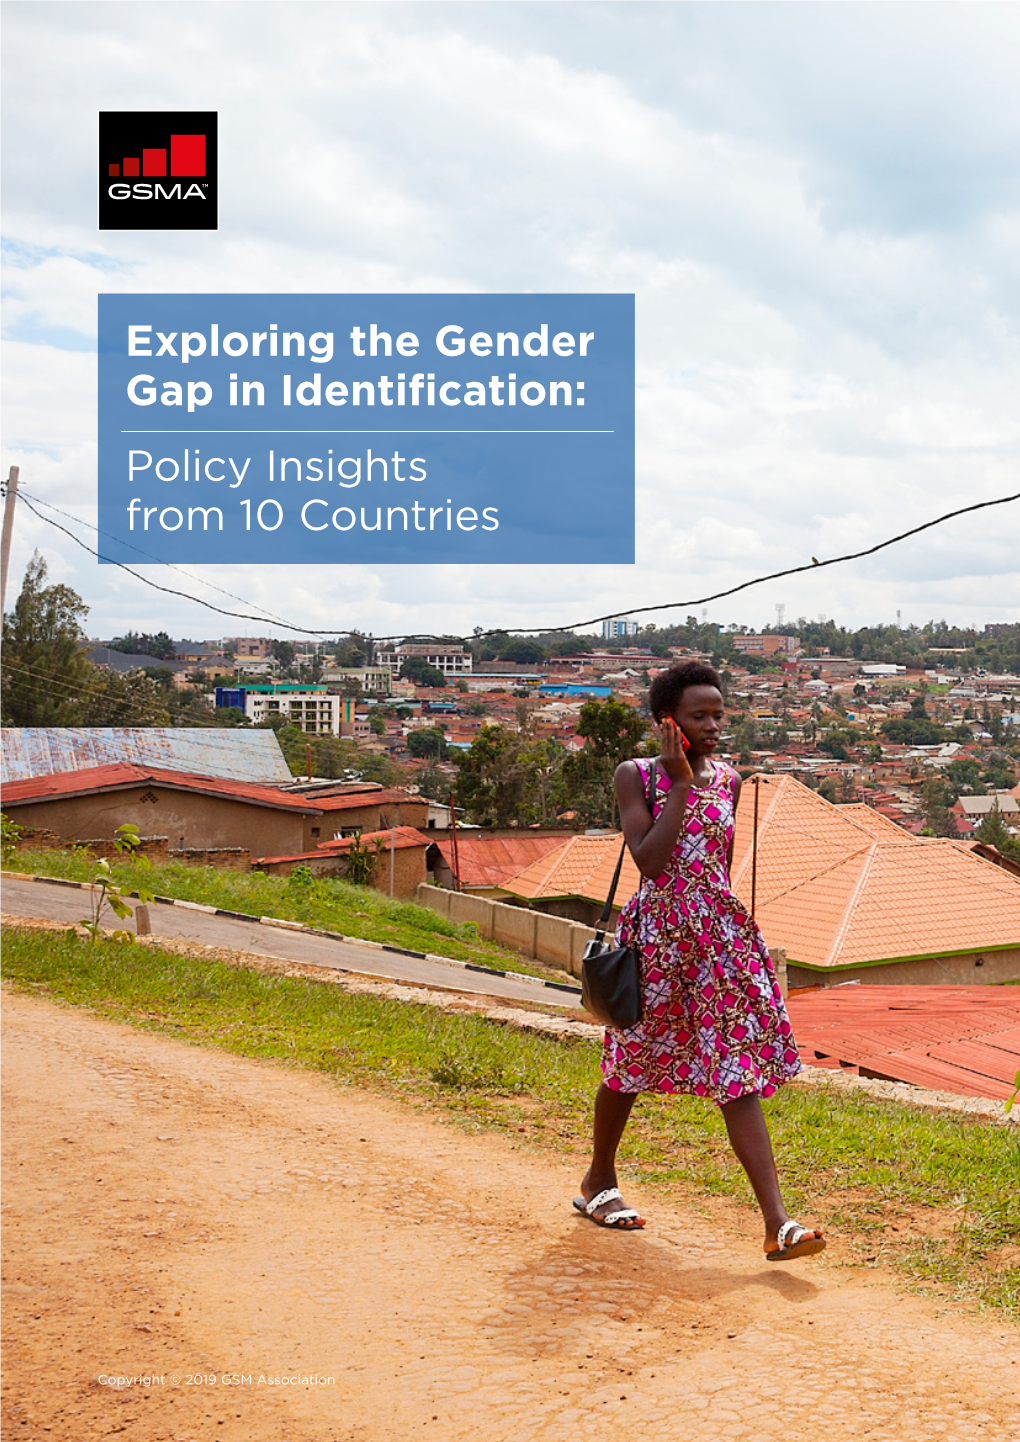 Exploring the Gender Gap in Identification: Policy Insights from 10 Countries